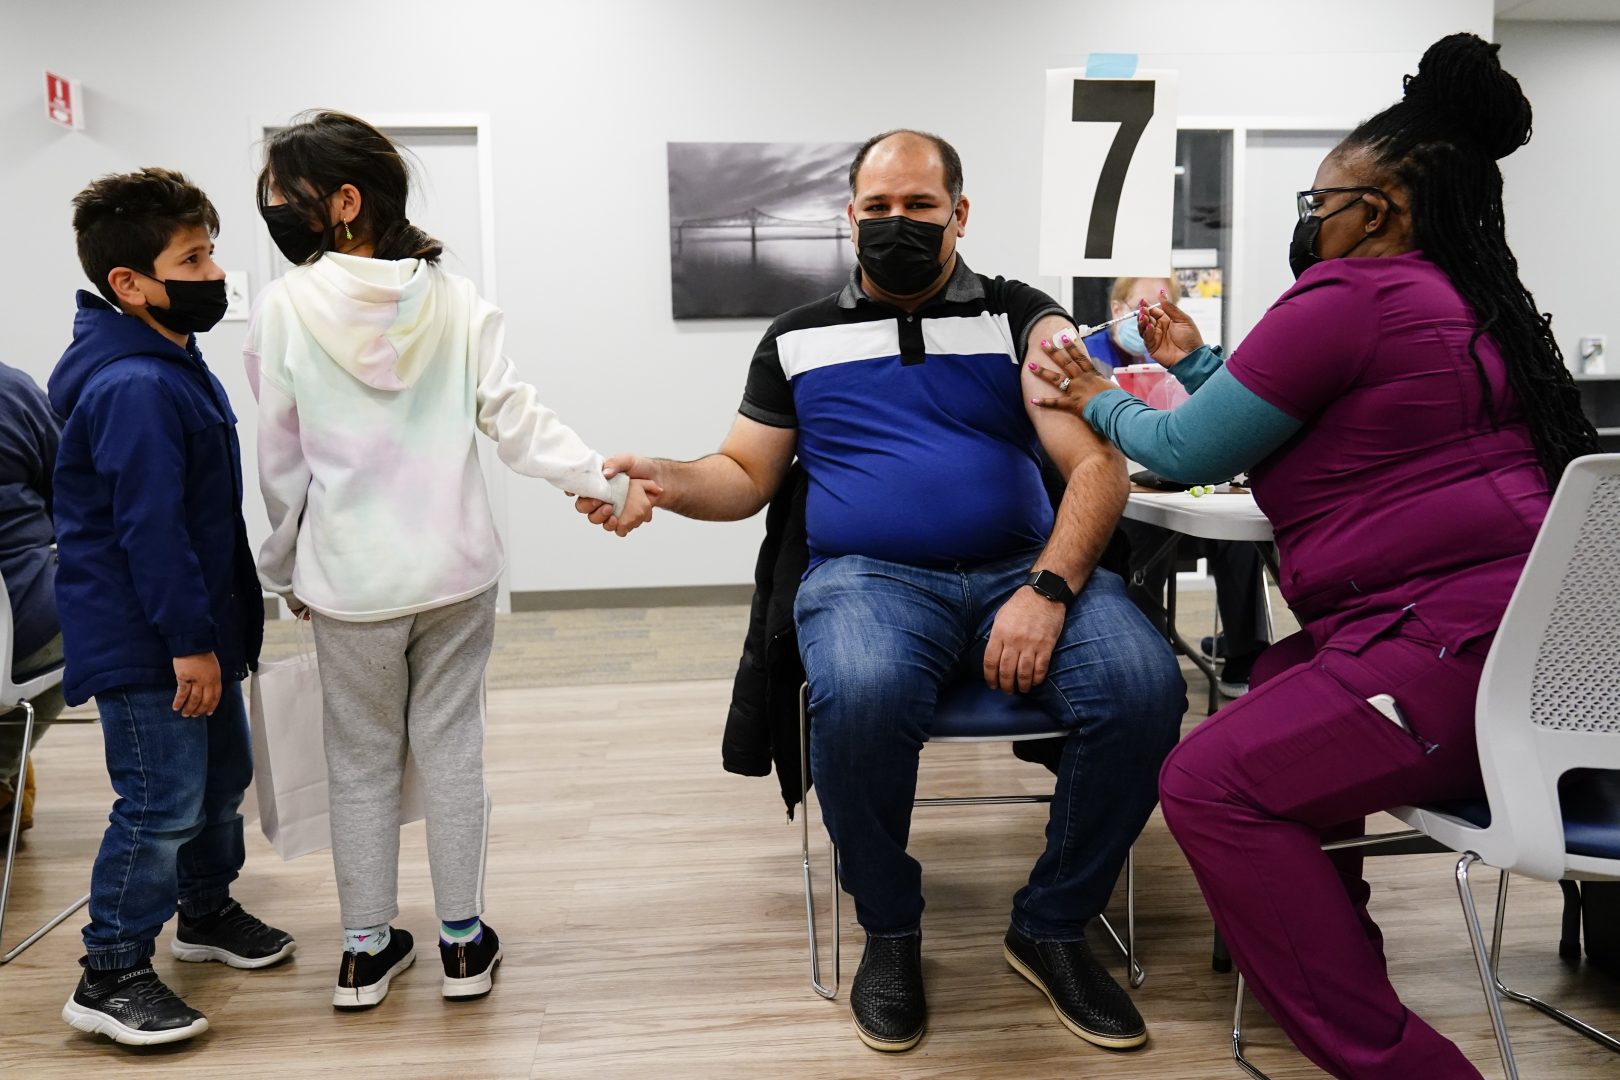 Nurse Sheena Davis, right, administers a dose of a Moderna COVID-19 vaccine to, Imran Amjad, as he holds his daughter's Falah Imran's hand and her brother Muhammad Ali Amjad, 6, looks on during a vaccination clinic at the Keystone First Wellness Center in Chester, Pa., Wednesday, Dec. 15, 2021. (AP Photo/Matt Rourke)